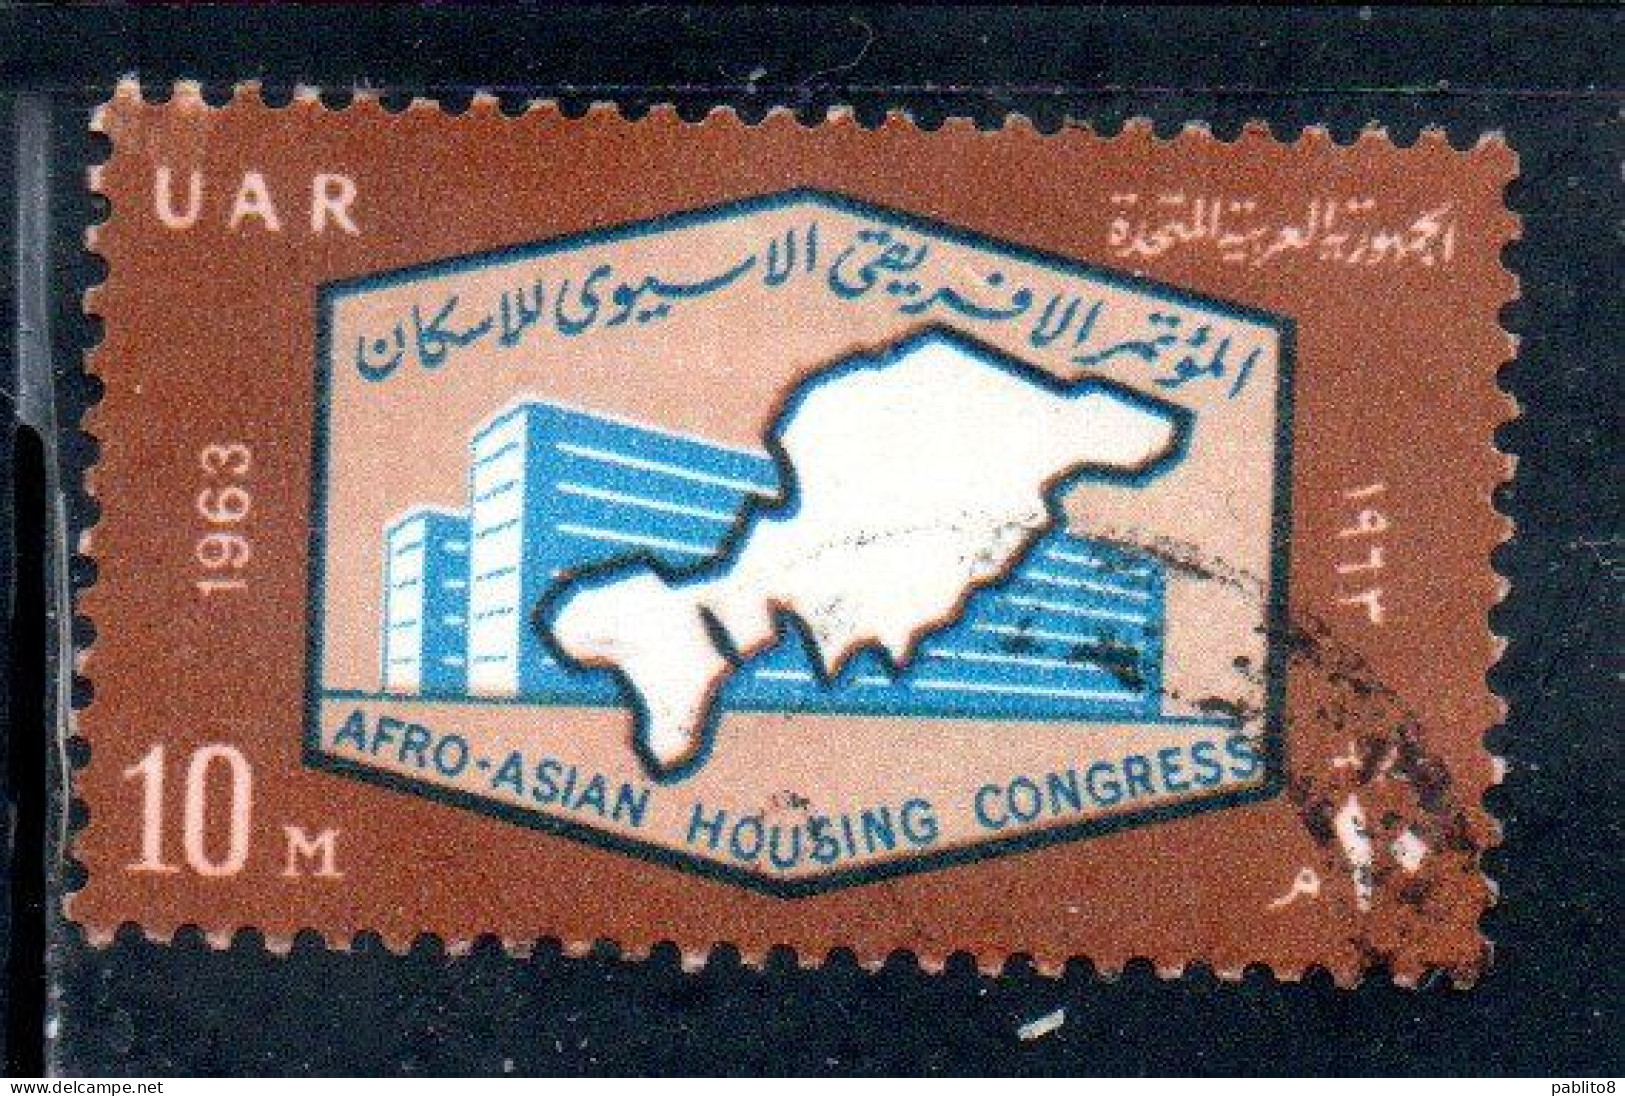 UAR EGYPT EGITTO 1963 AFRO-ASIAN HOUSING CONGRESS MODERN BUILDING AND MAP 10m  USED USATO OBLITERE' - Used Stamps